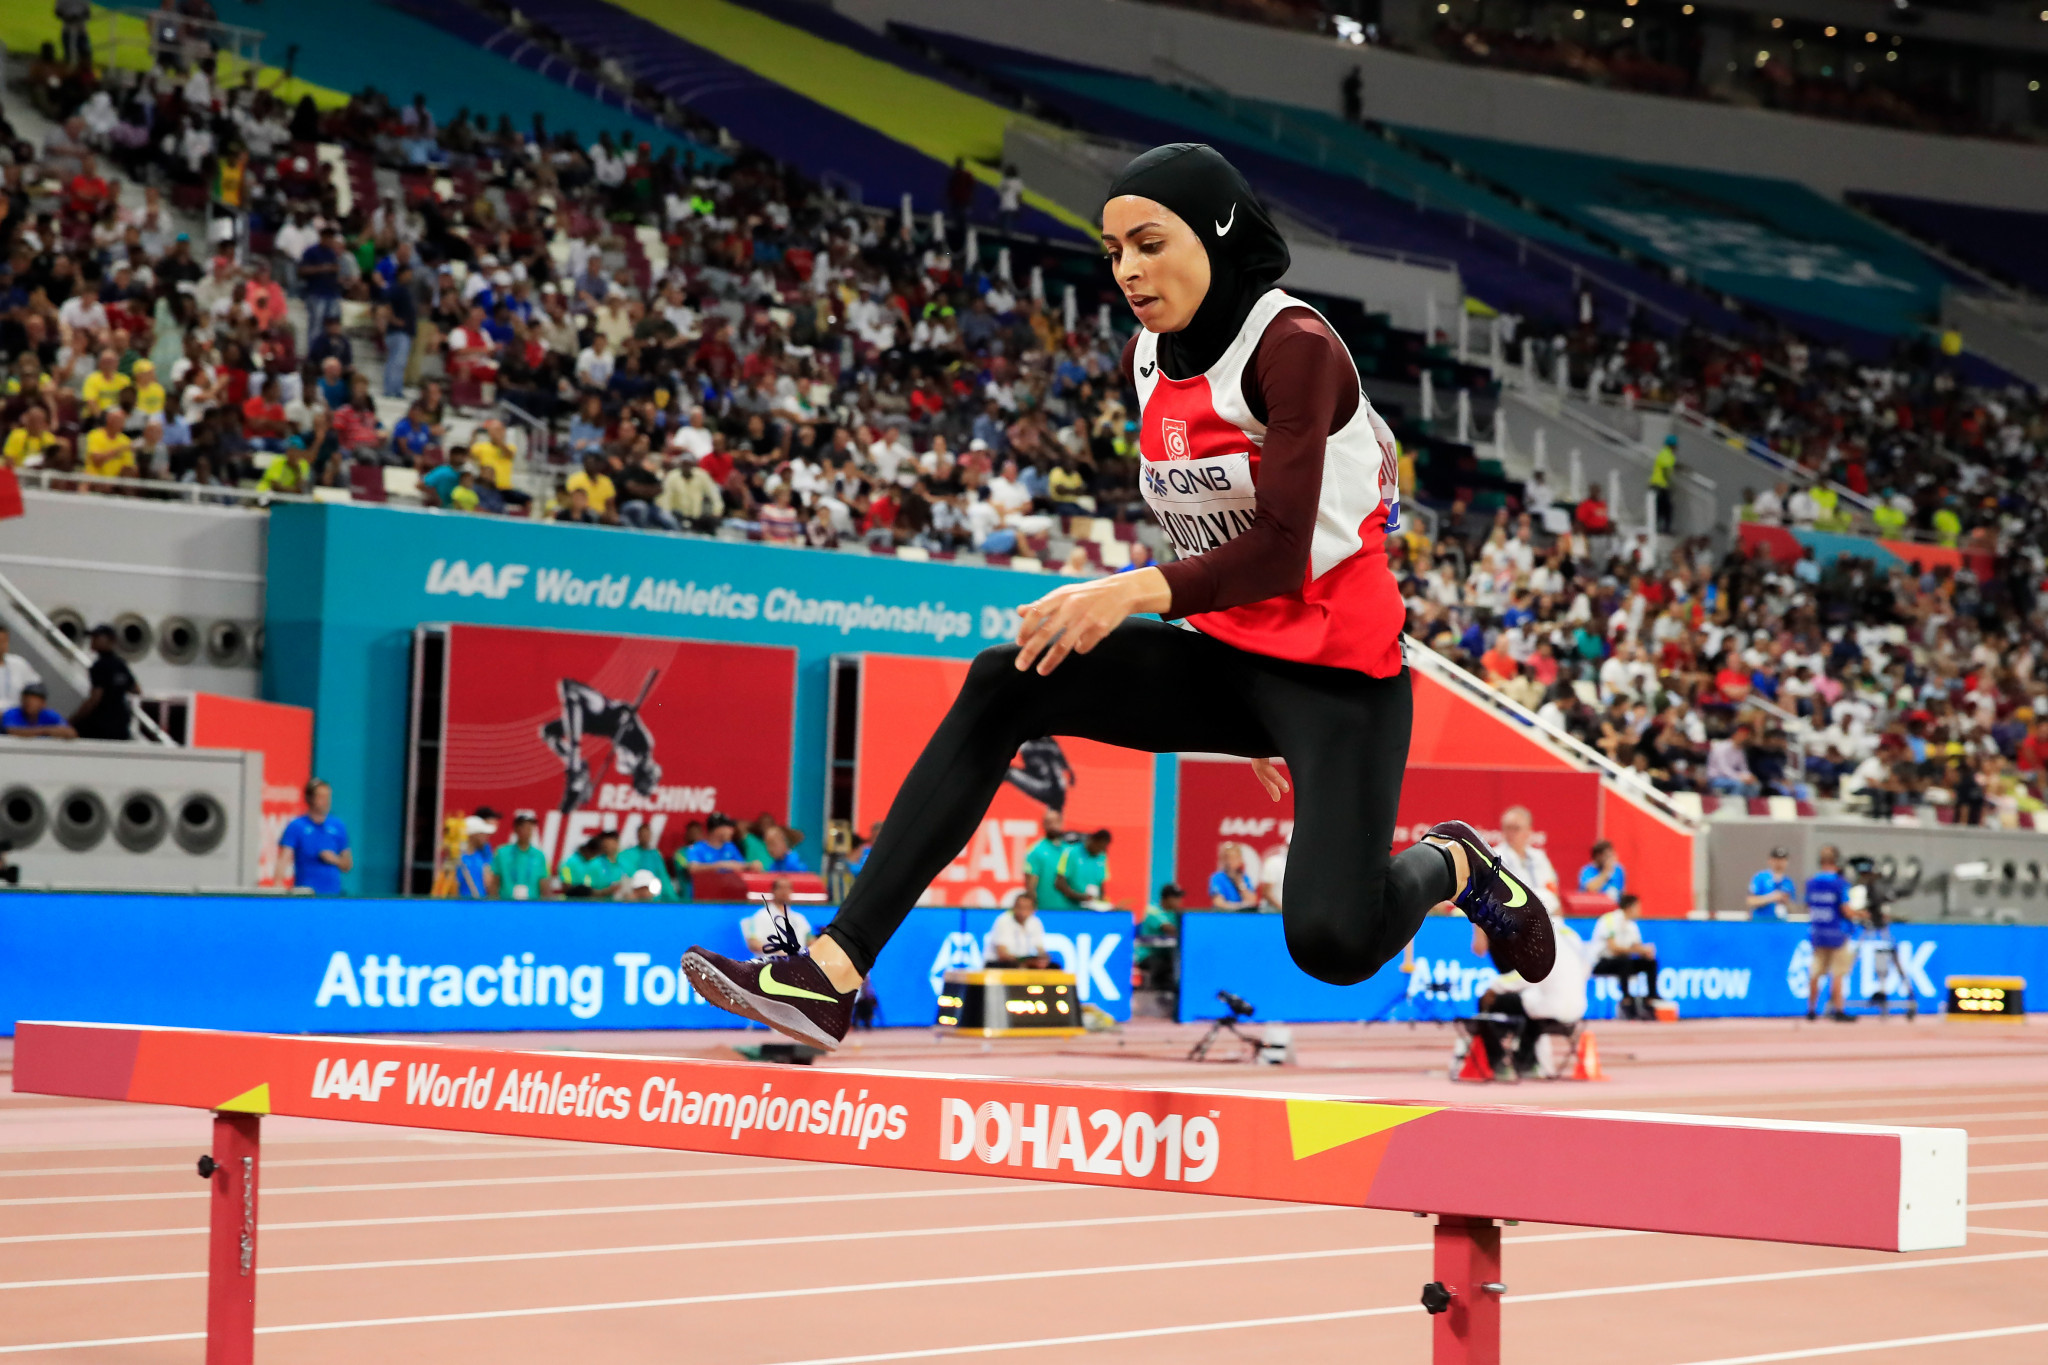 Tunisia's Marwa Bouzayani was among competitors in the women's heats of the 3,000m steeplechase ©Getty Images